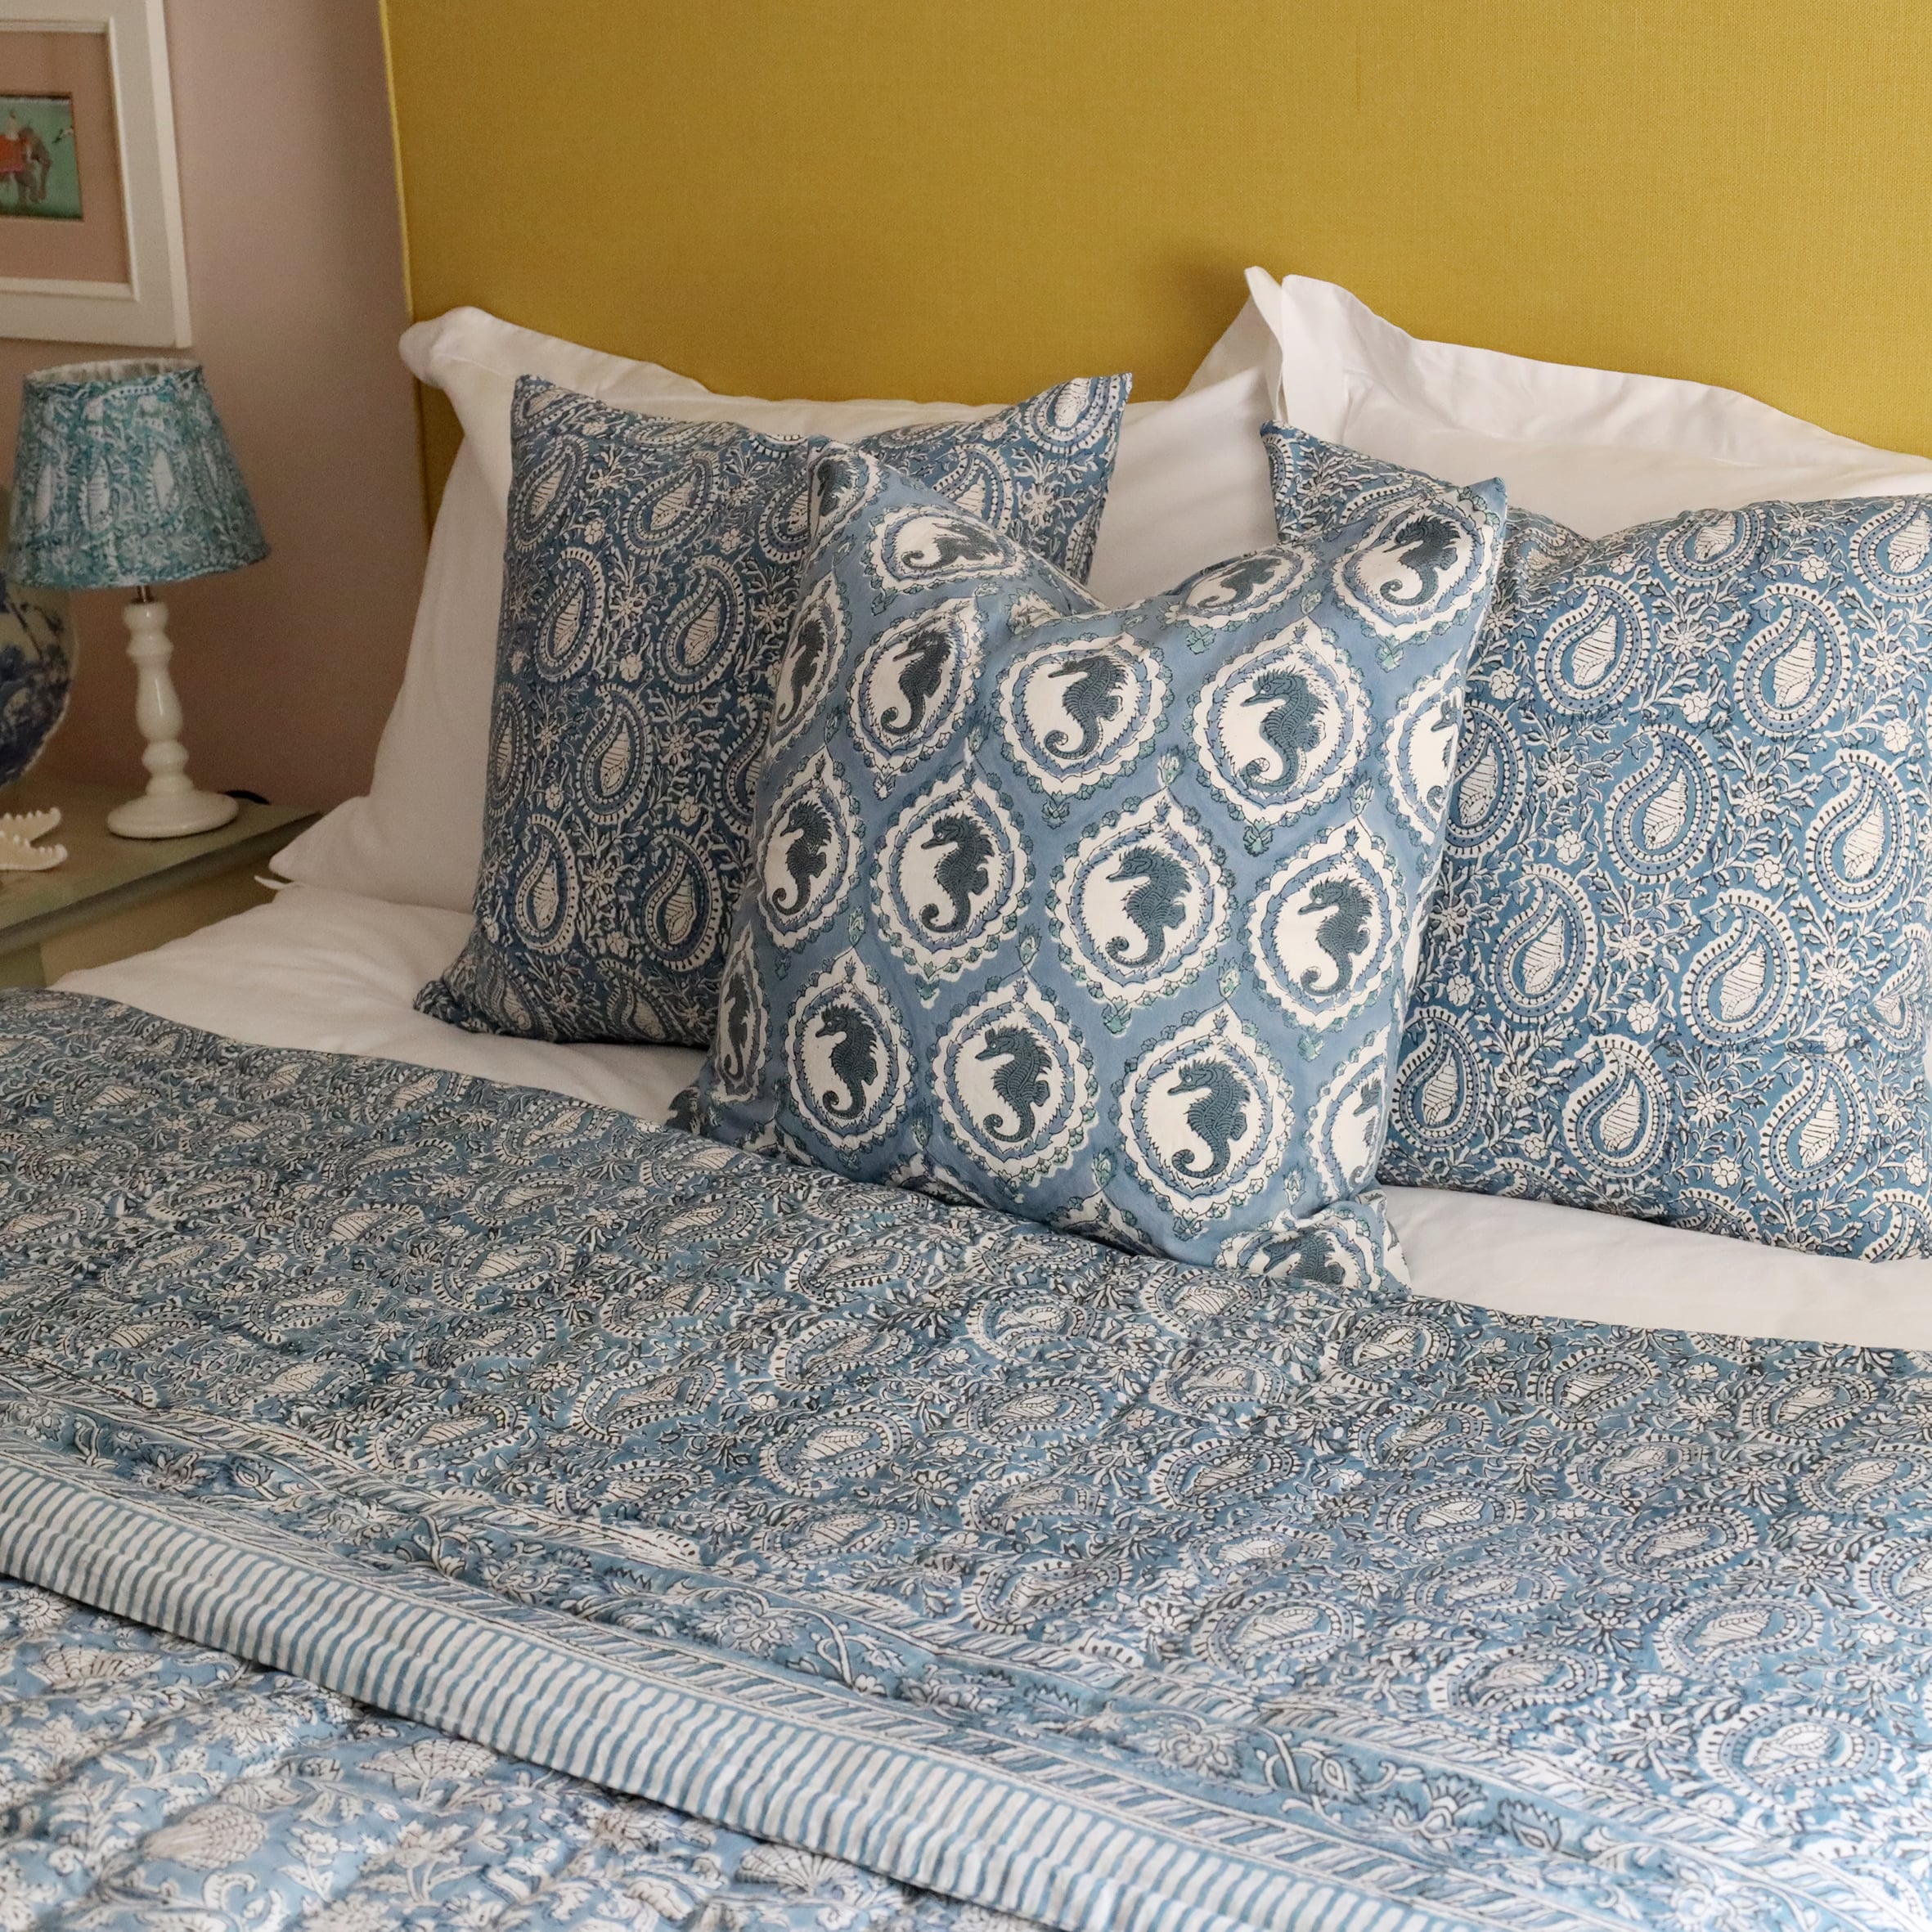 Ocean Blue Seahorse cushion which is Hand block printed fabric in a  blue .The cushion is placed on a bed with two other block print cushions behind in on a crisp white bed,in front of a mustard yellow headboard.Next to the bed is a pink lampbase with a pleated block print fabric lampshade on a hand painted bedside table